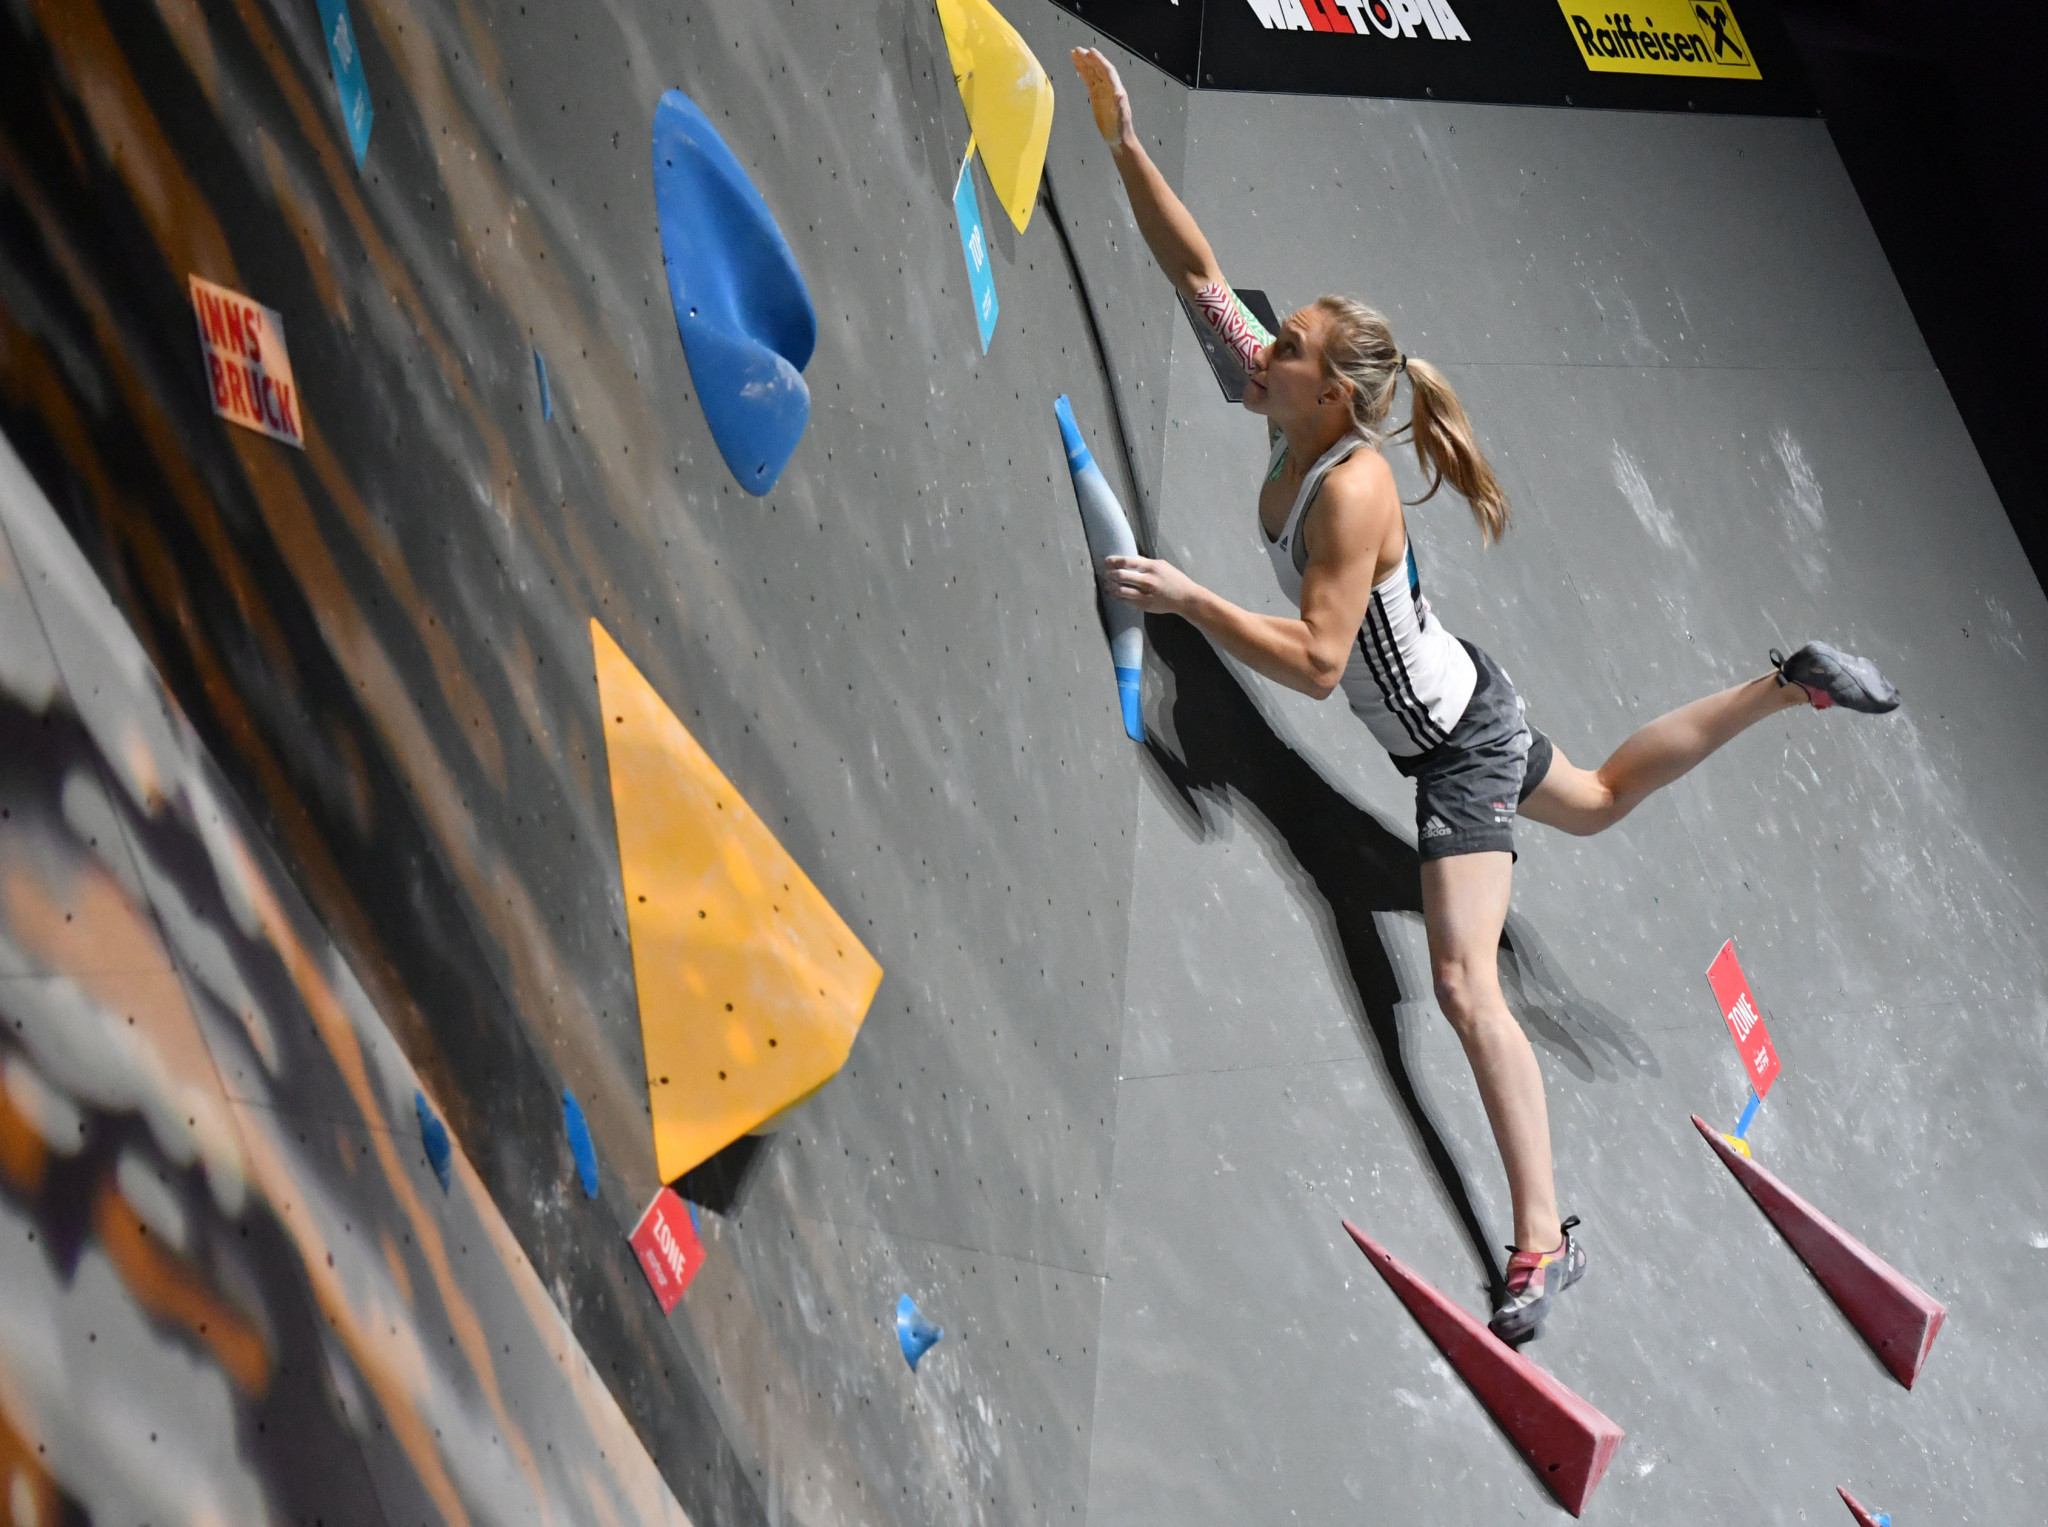 Garnbet tops bouldering qualification at IFSC World Cup in Wujiang